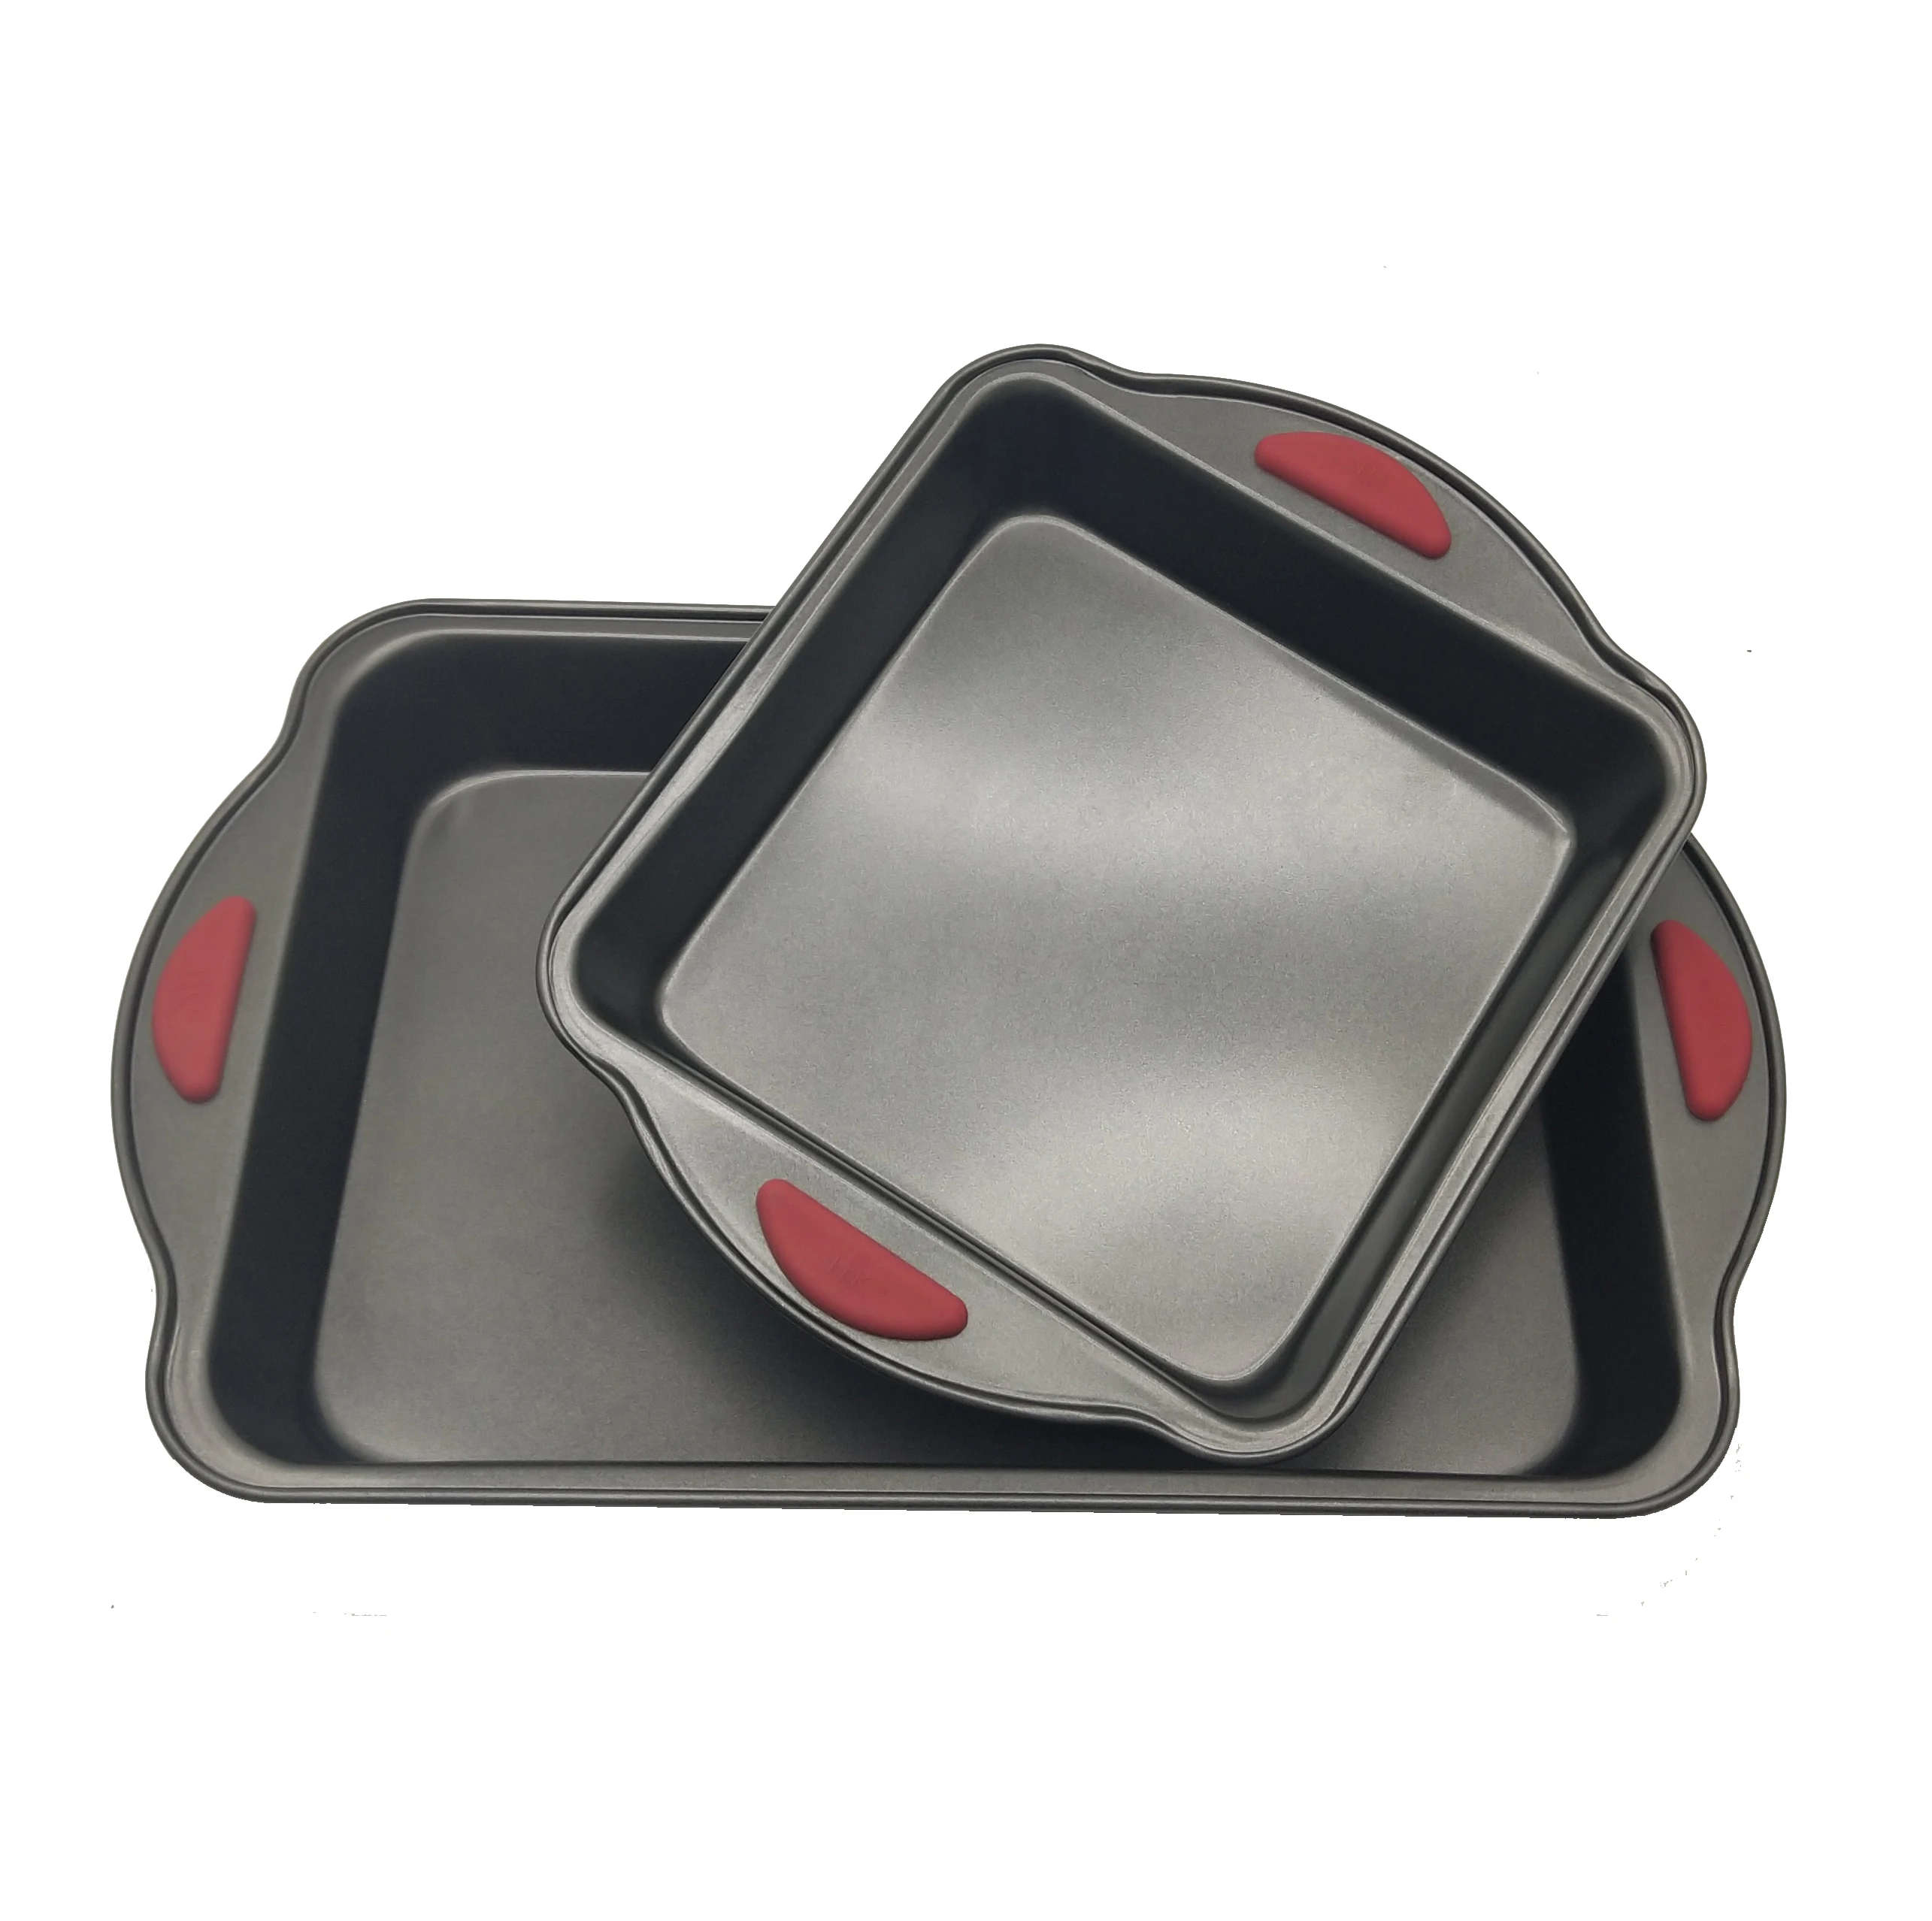 
Amazon hot selling Nonstick Carbon Steel Bakeware Sets With Red Silicone Handles Nonstick Baking Tray 